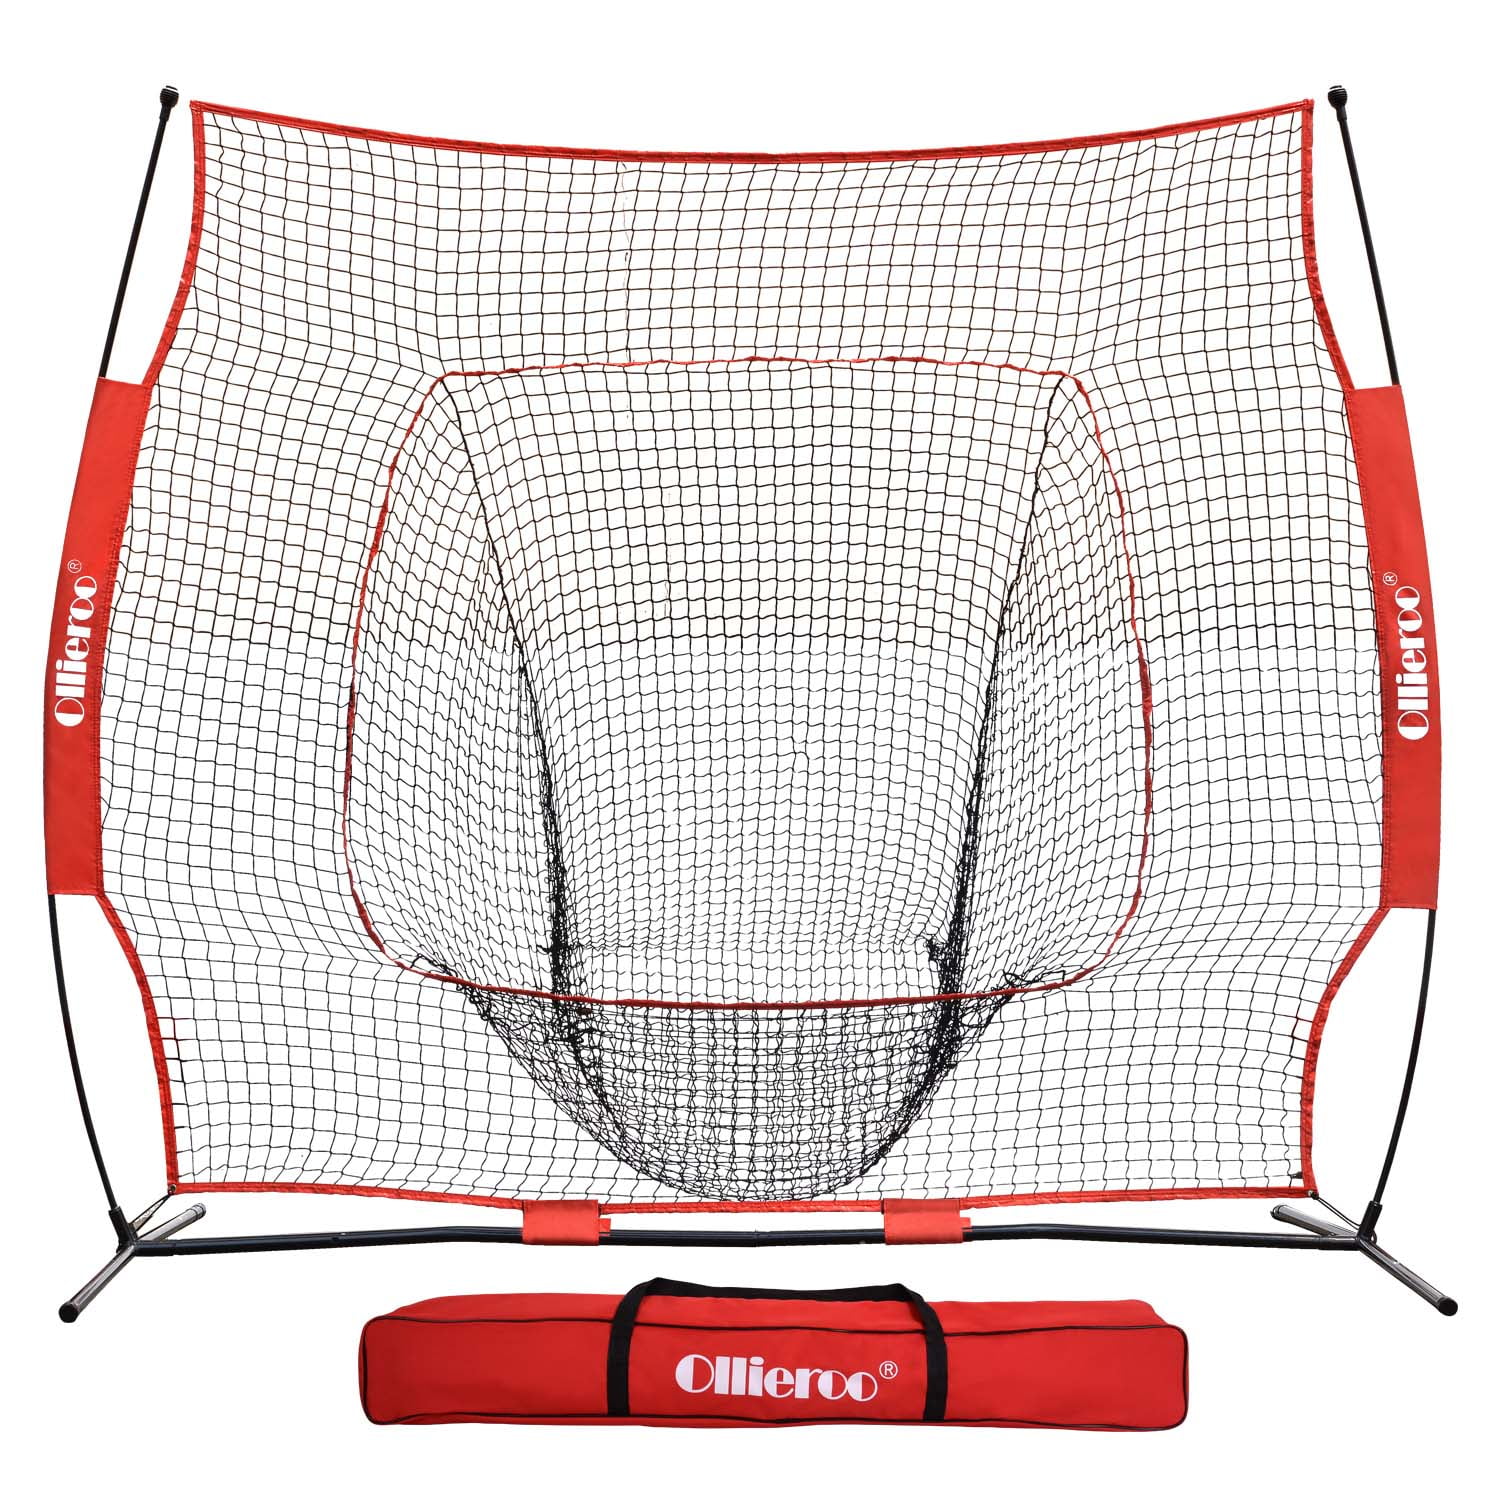 Includes for sale online Ollieroo 7x7 Baseball & Softball Practice Net for Hitting Pitching 